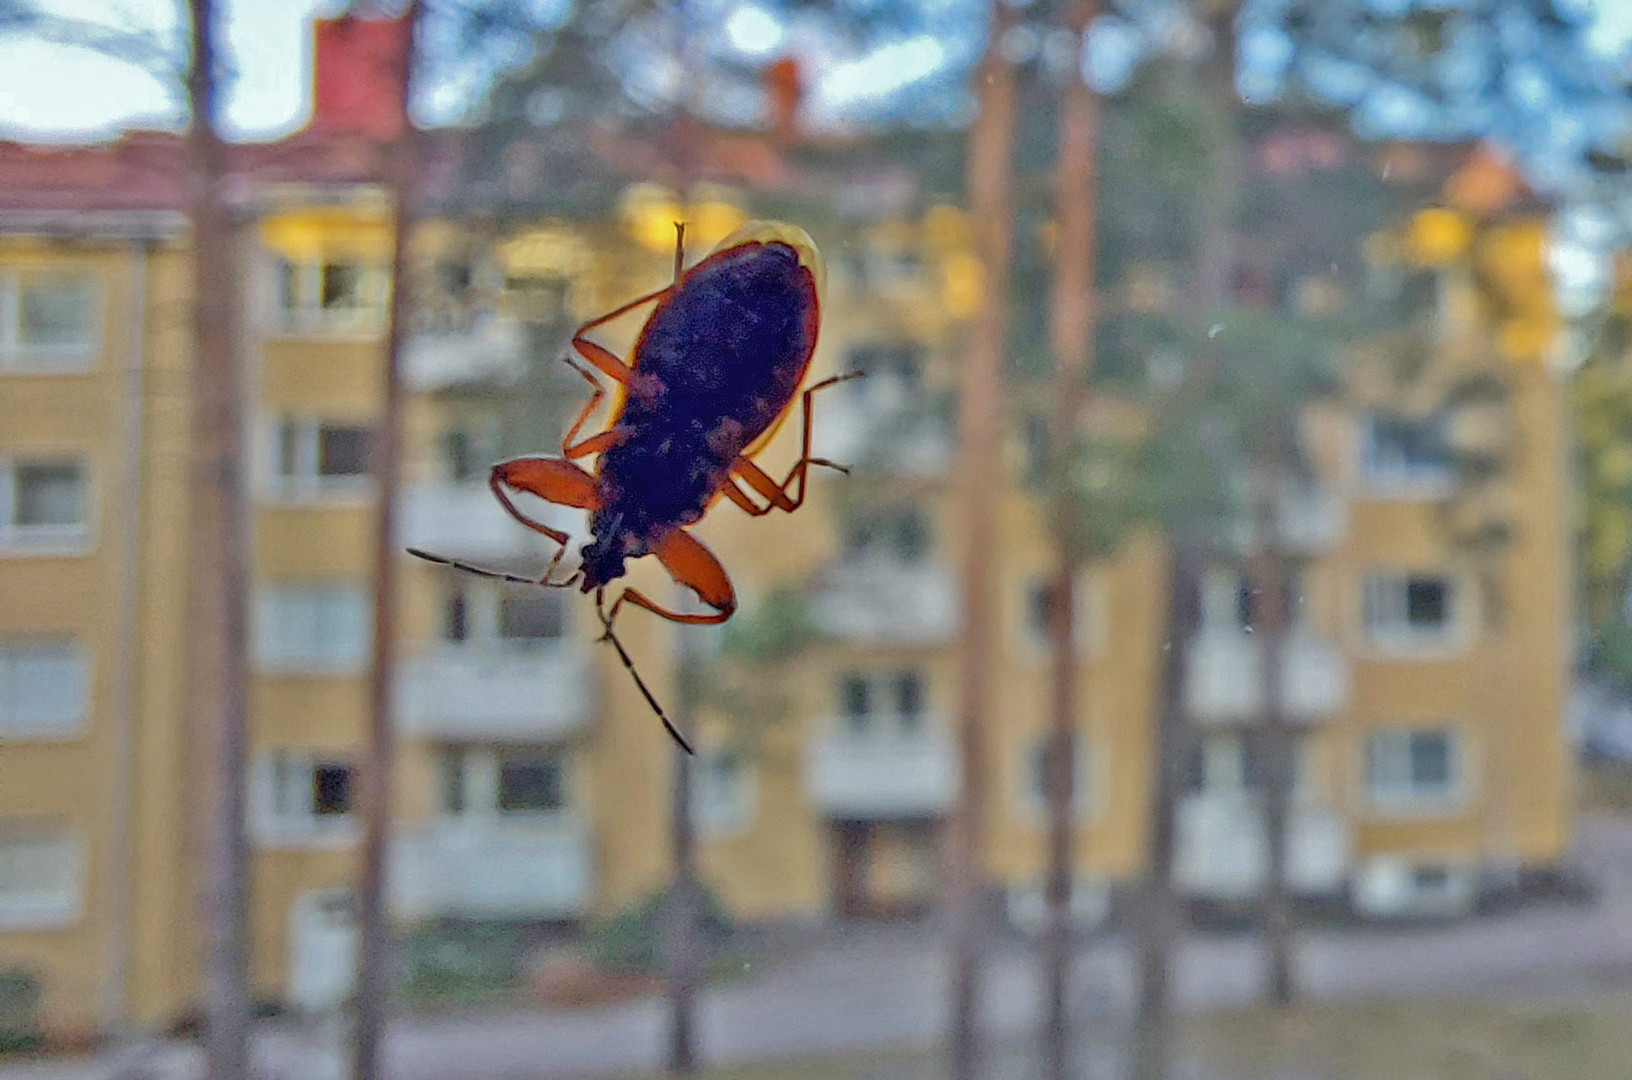 The un knowing insect out side our window